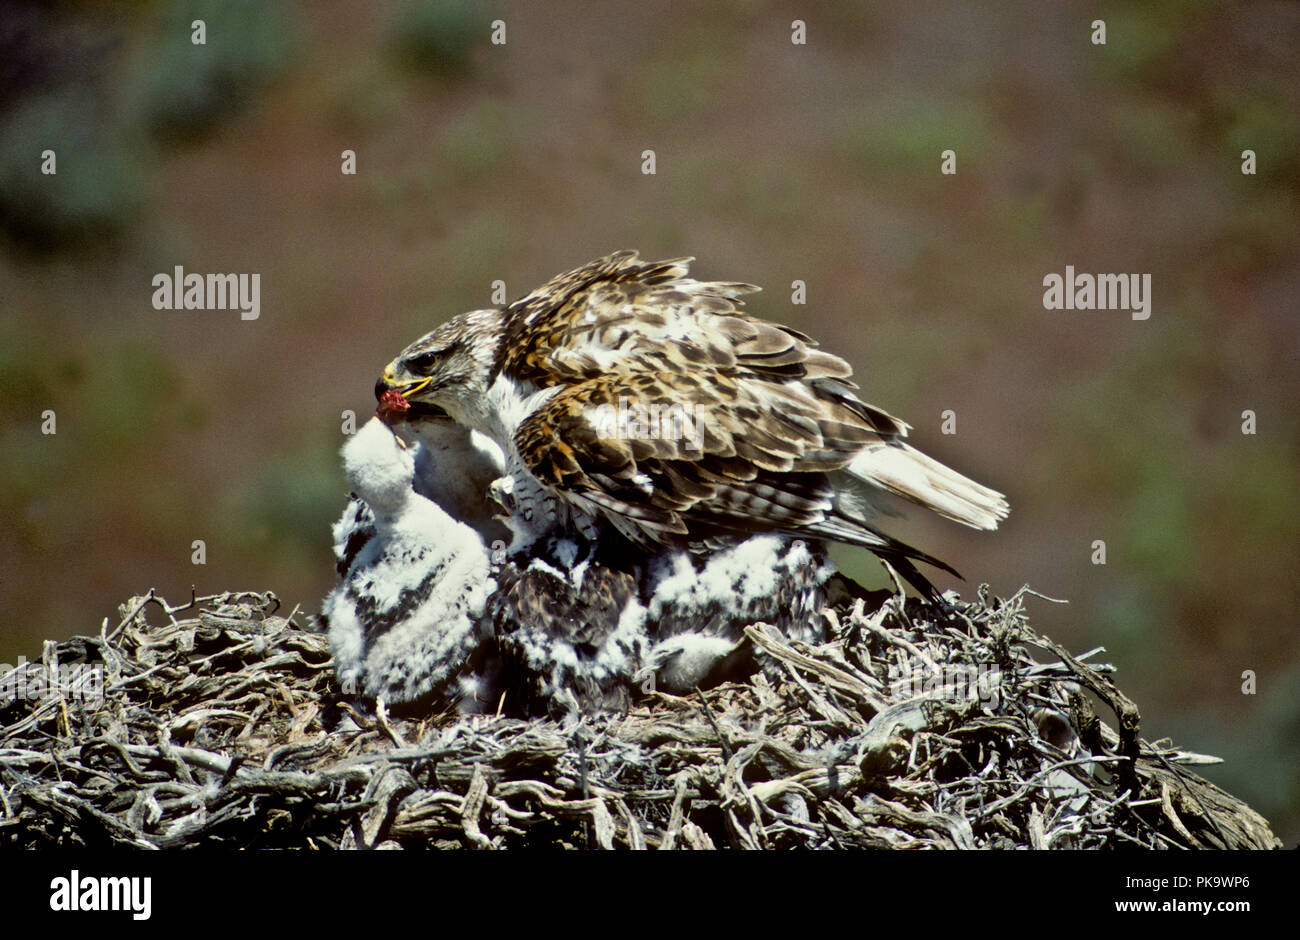 Ferruginous hawk (Bureo regalis) feeding young in nest in the Morley Nelson Snake River Birds of Prey National Conservation Area, Idaho Stock Photo